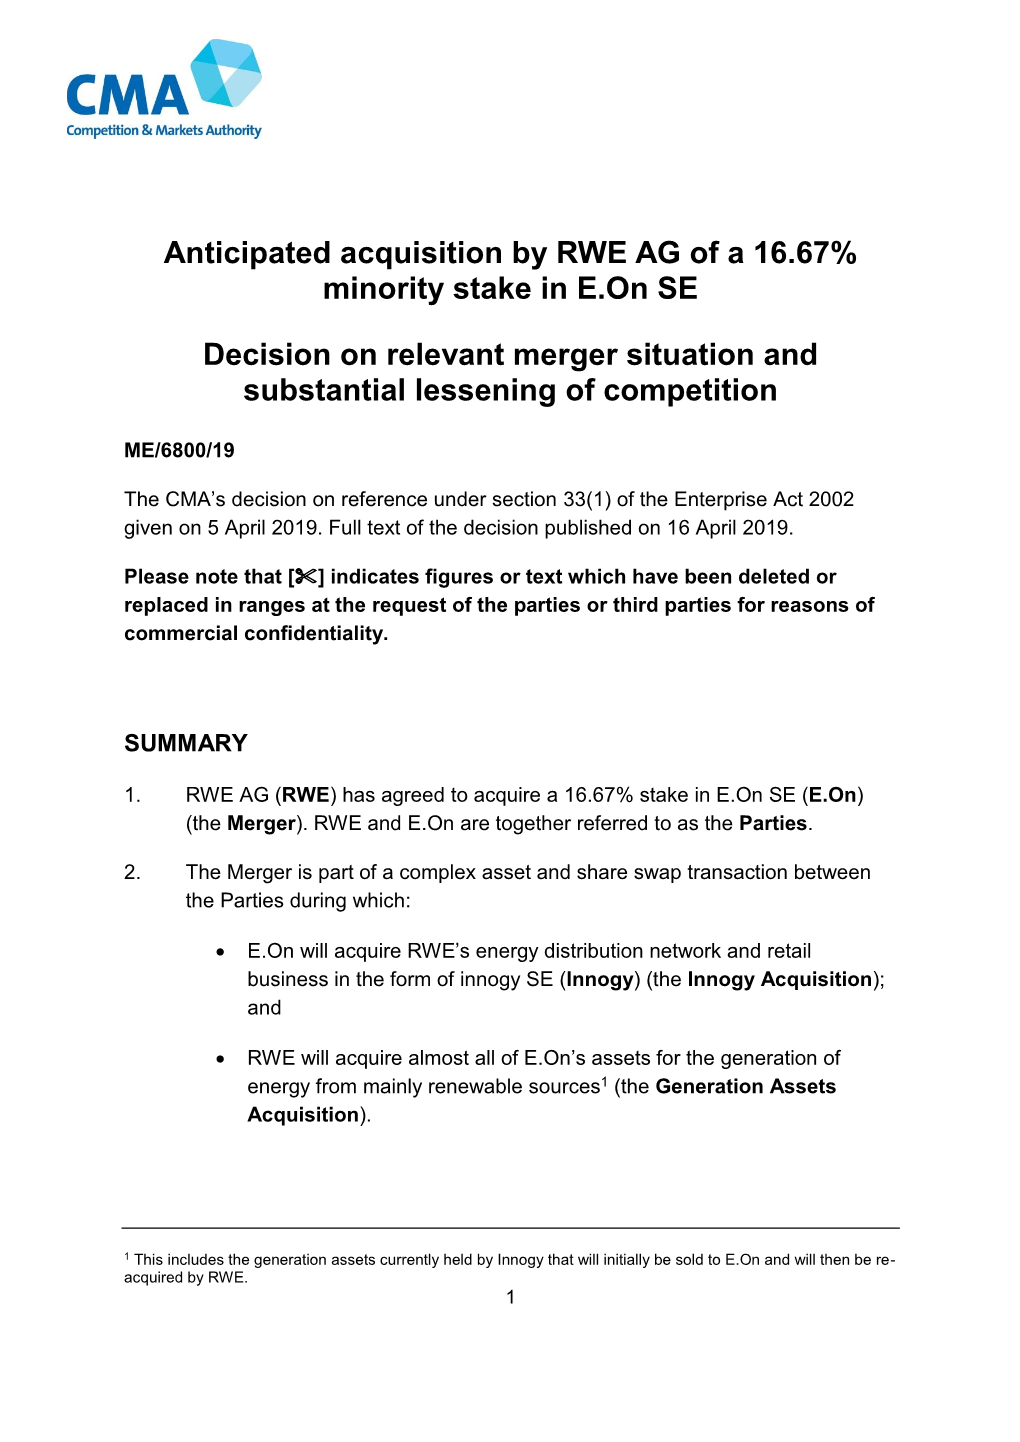 Anticipated Acquisition by RWE AG of a 16.67% Minority Stake in E.On SE